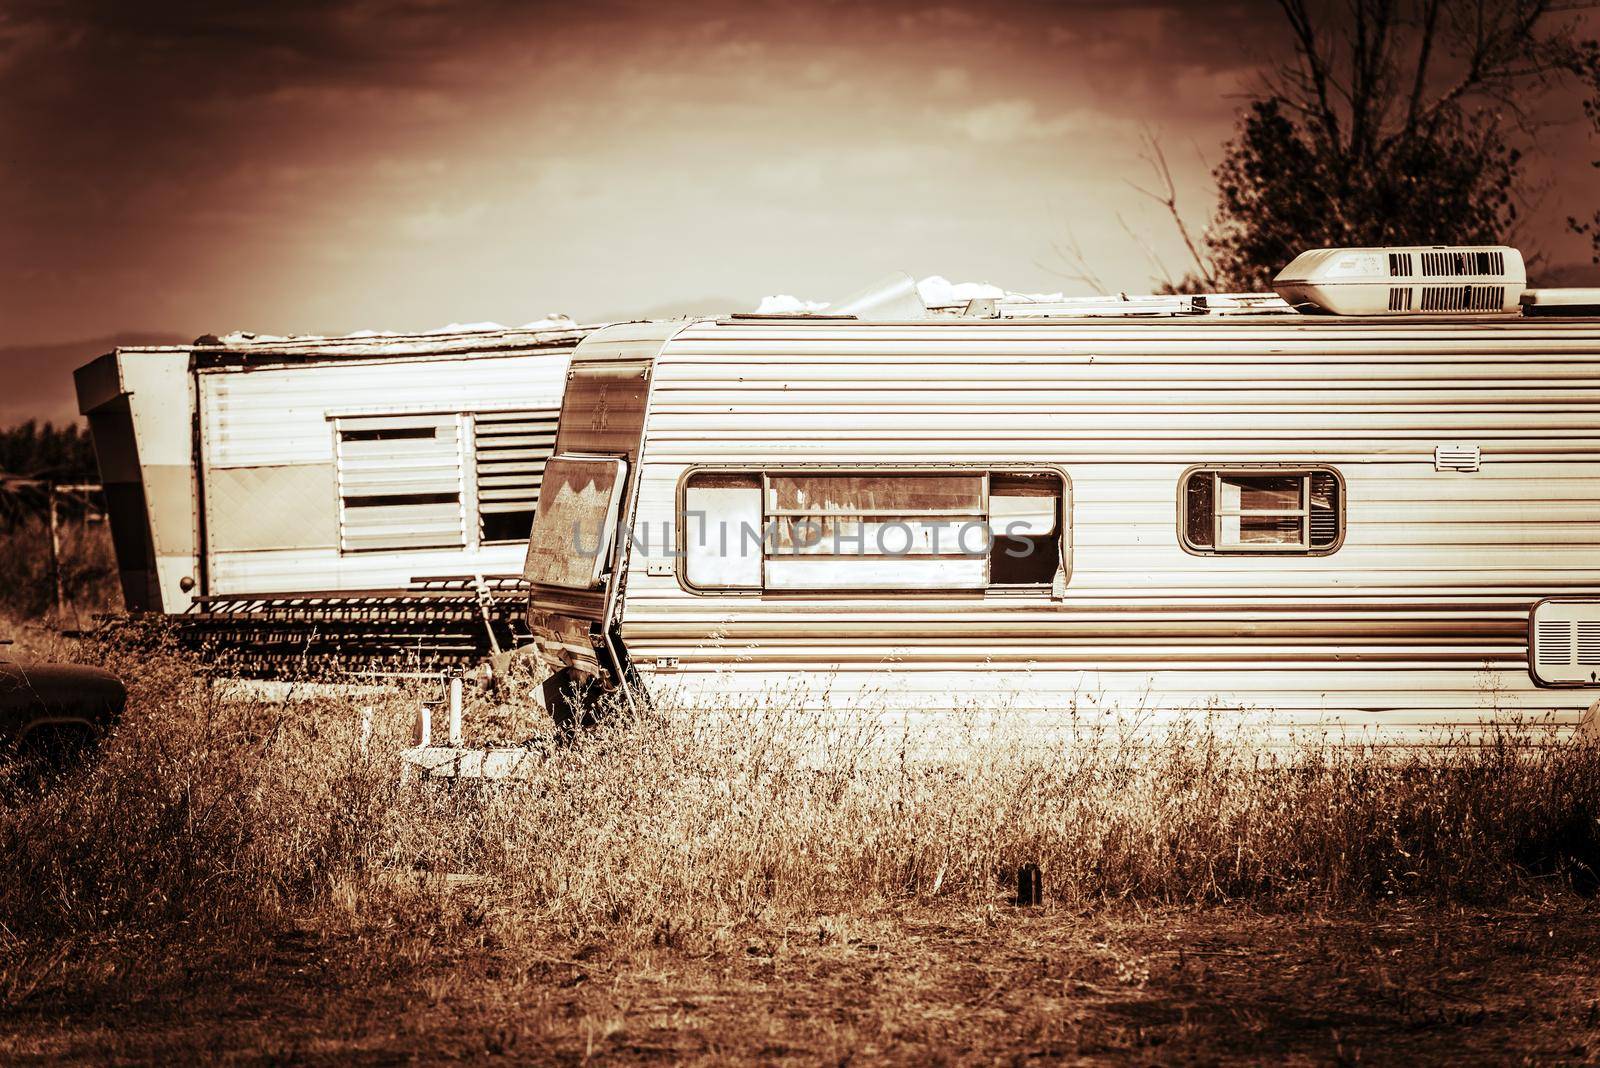 Old Rusty Campers in Some Rural American Area. Trailer Park Living. Browny Sepia Color Grading. by welcomia